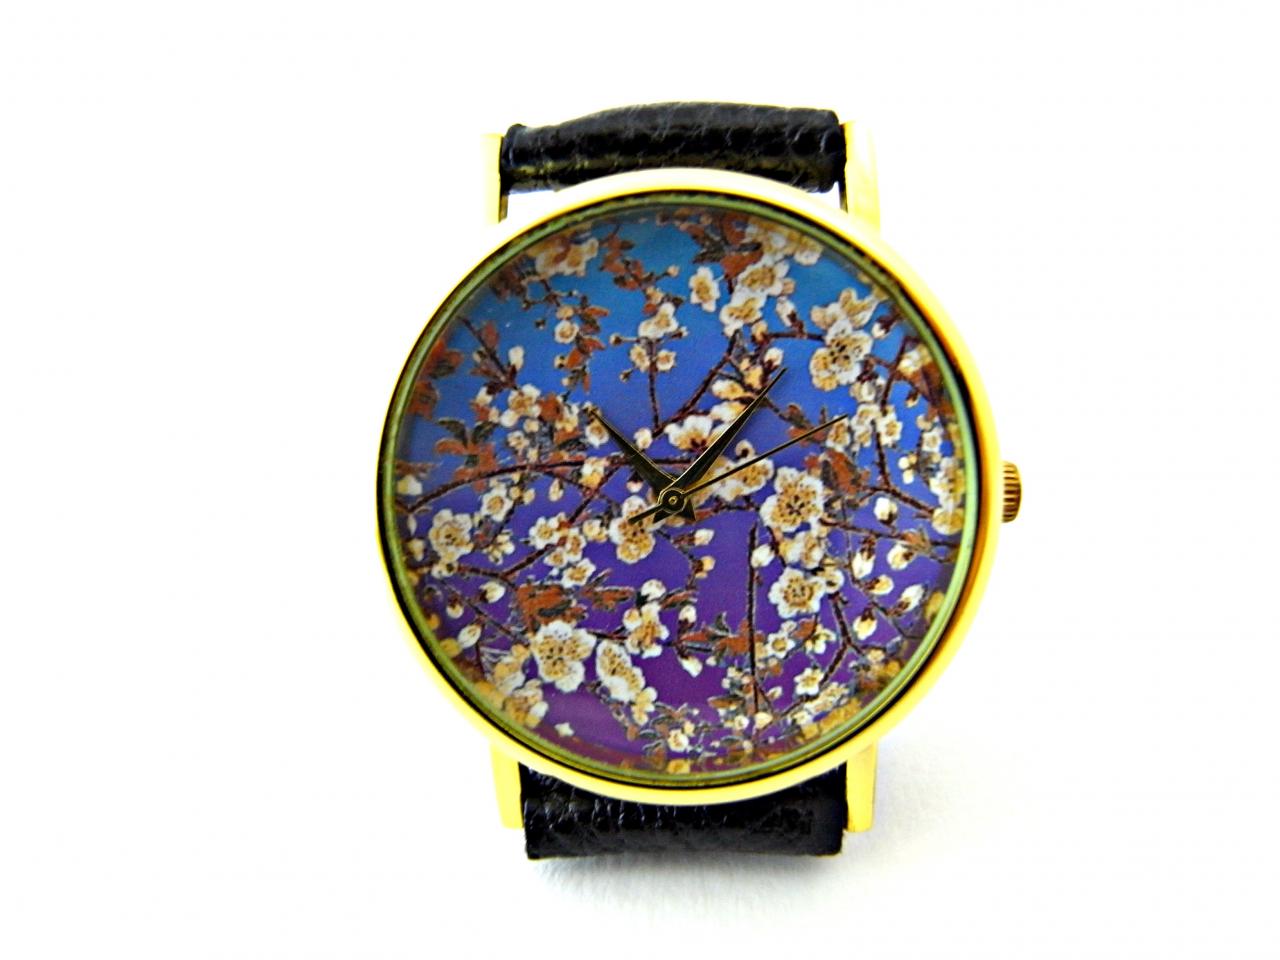 Cherry Blossoms Leather Wrist Watch, Floral Watch, Woman Man Lady Unisex Watch, Genuine Leather Handmade Unique Watch #75